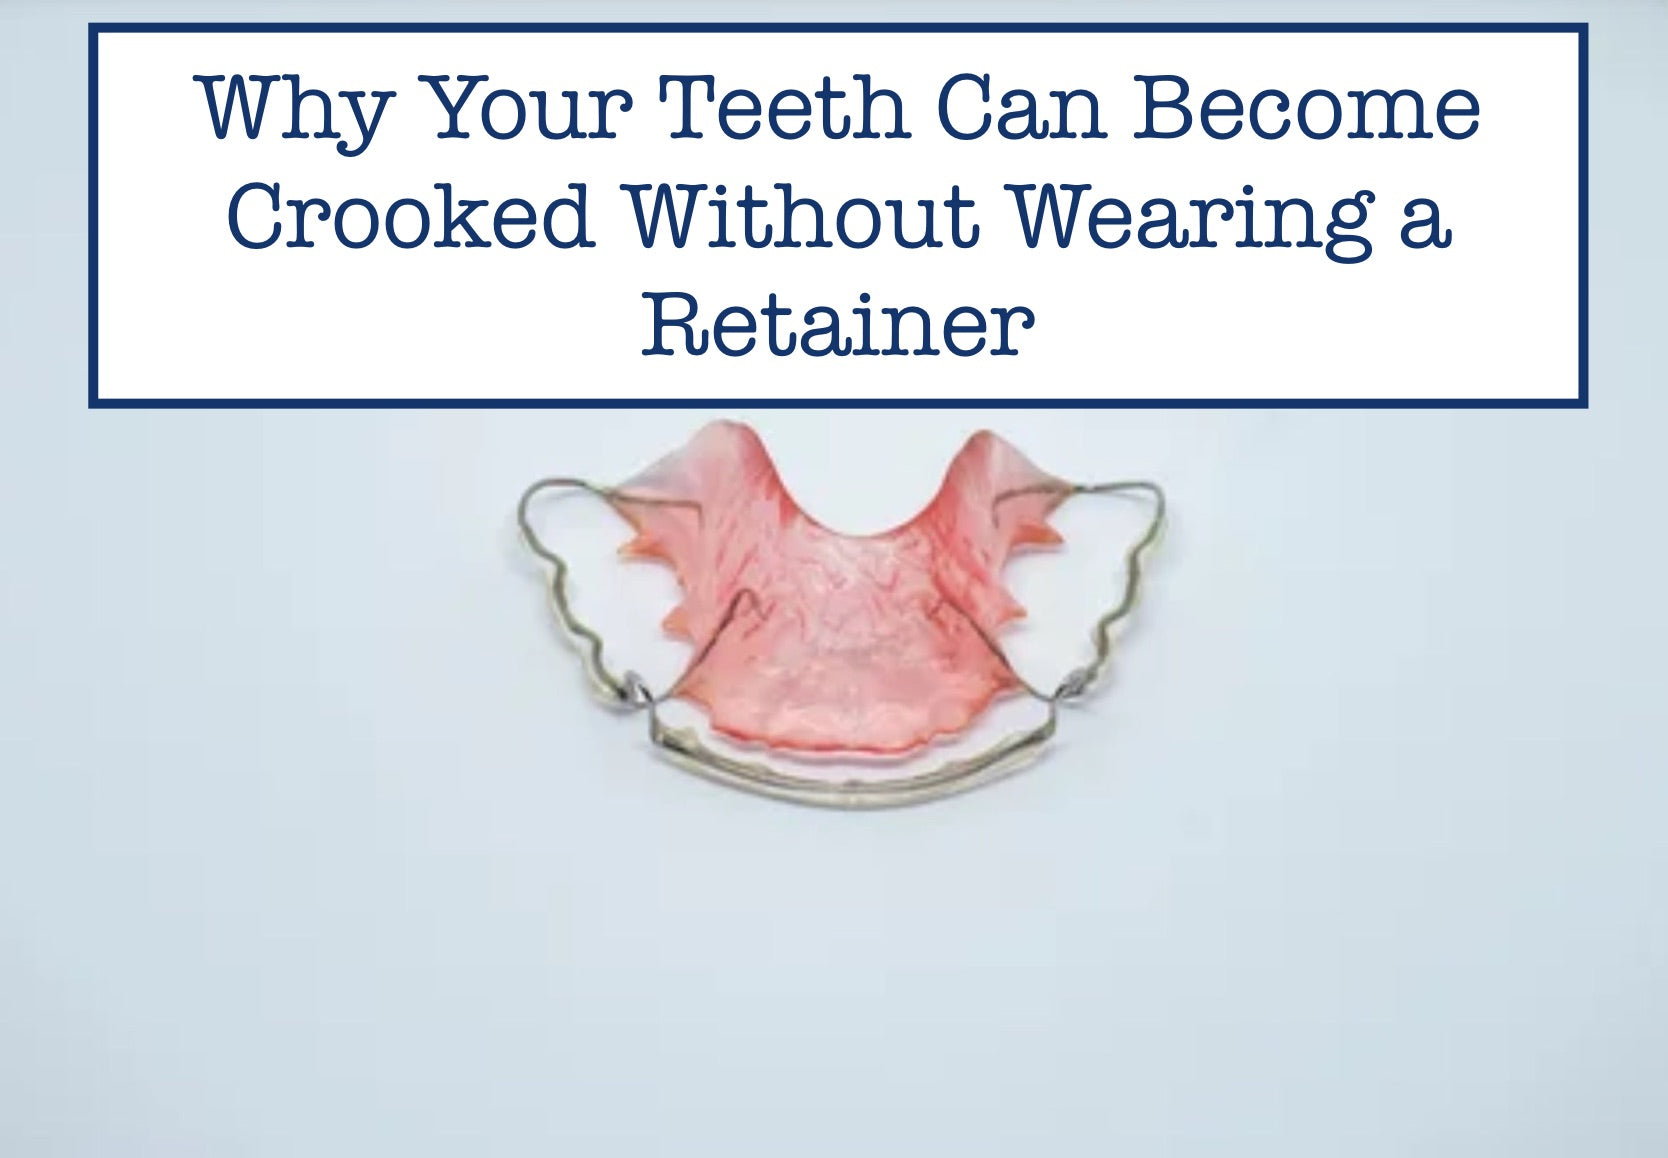 Why Your Teeth Can Become Crooked Without Wearing a Retainer